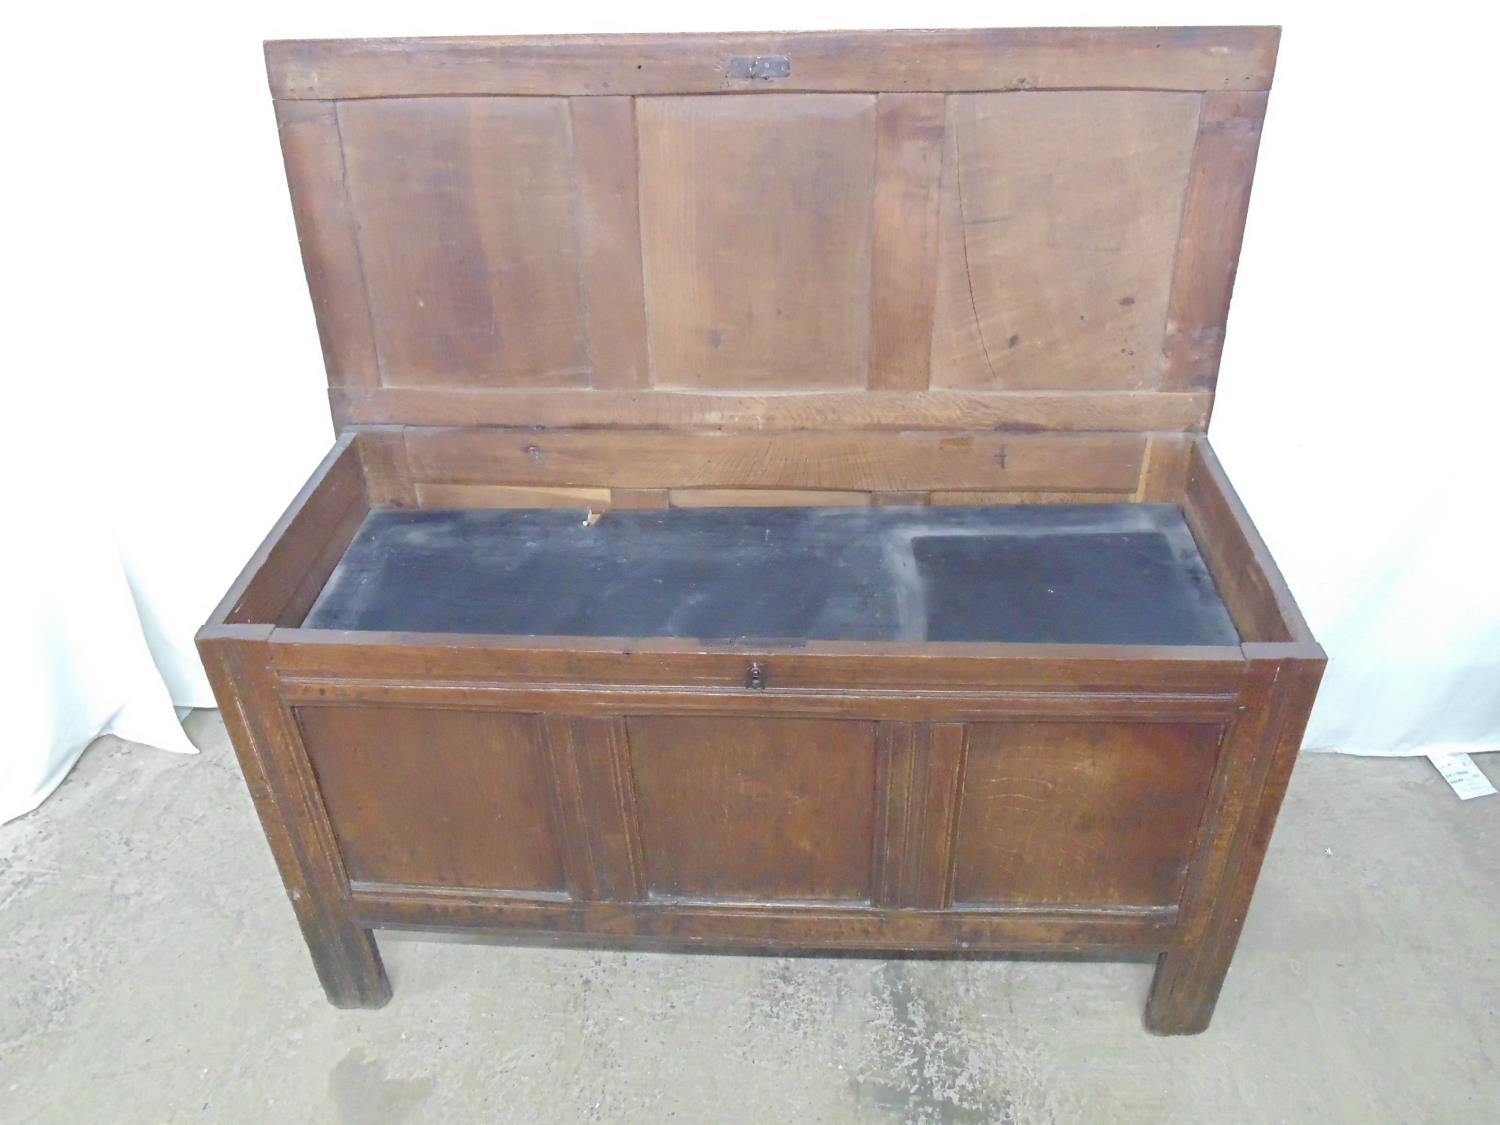 19th century oak coffer having three panel top and front, standing on square legs - 51.25" x 22.5" x - Image 3 of 3